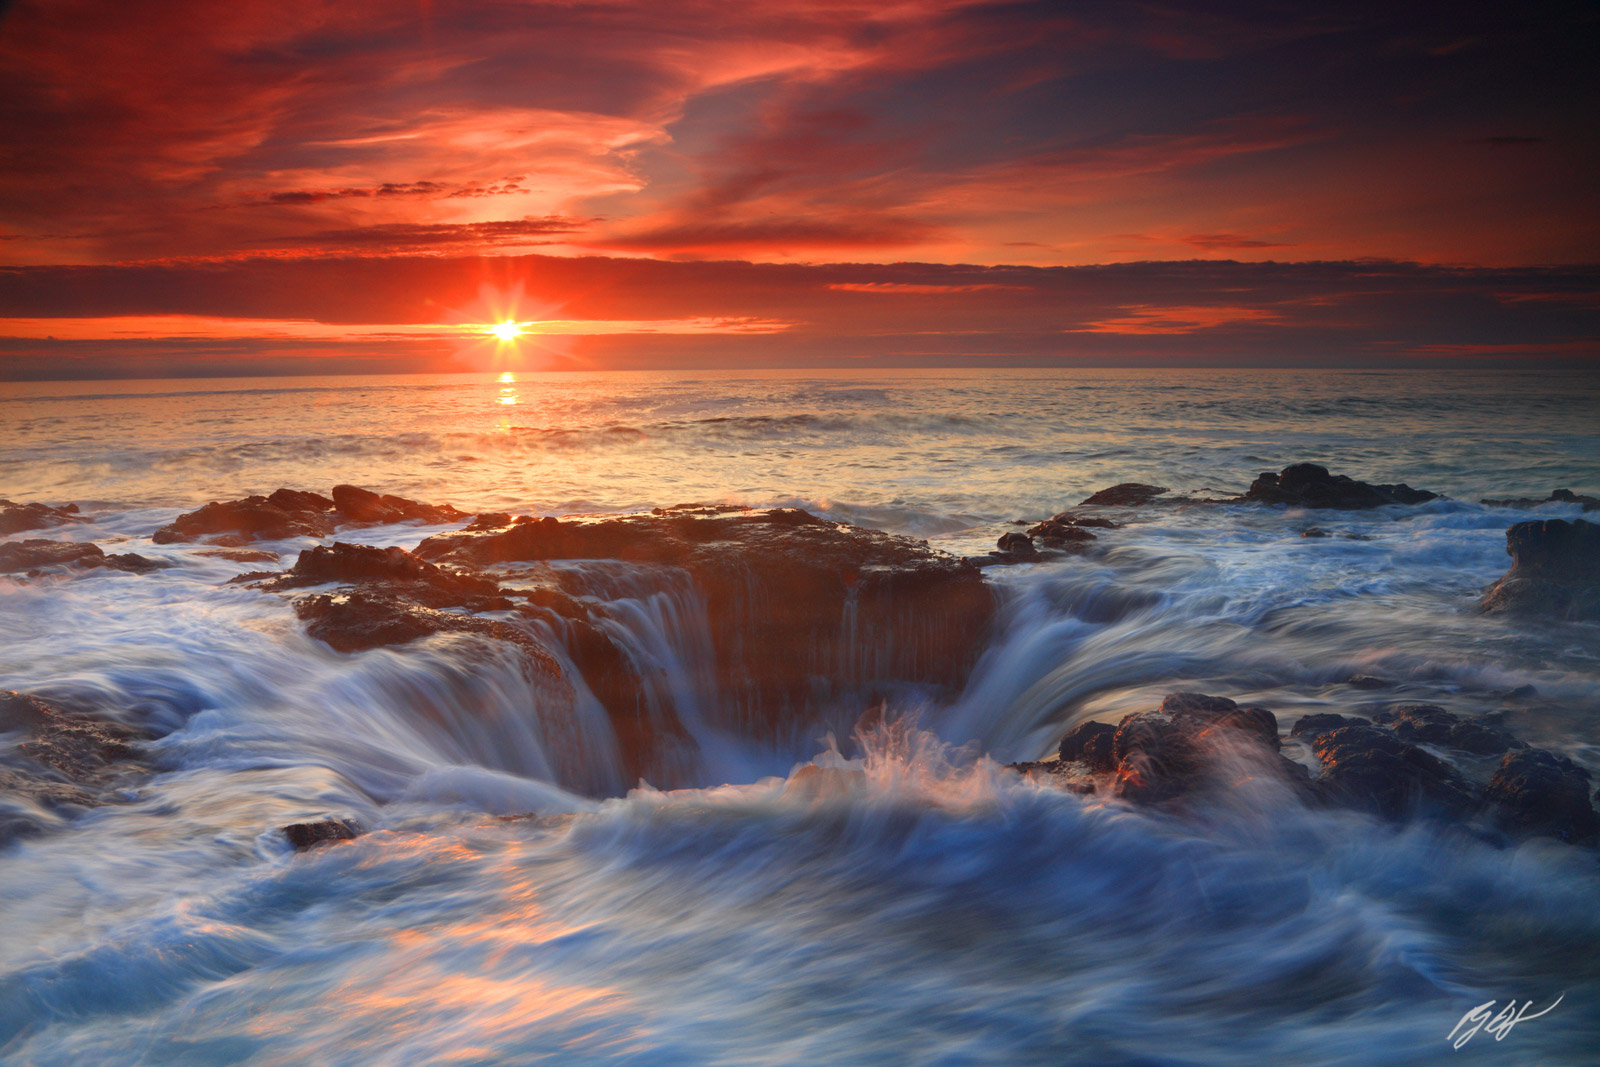 Sunset over Thor's Well in Cape Perpetua State Park on the Oregon Coast